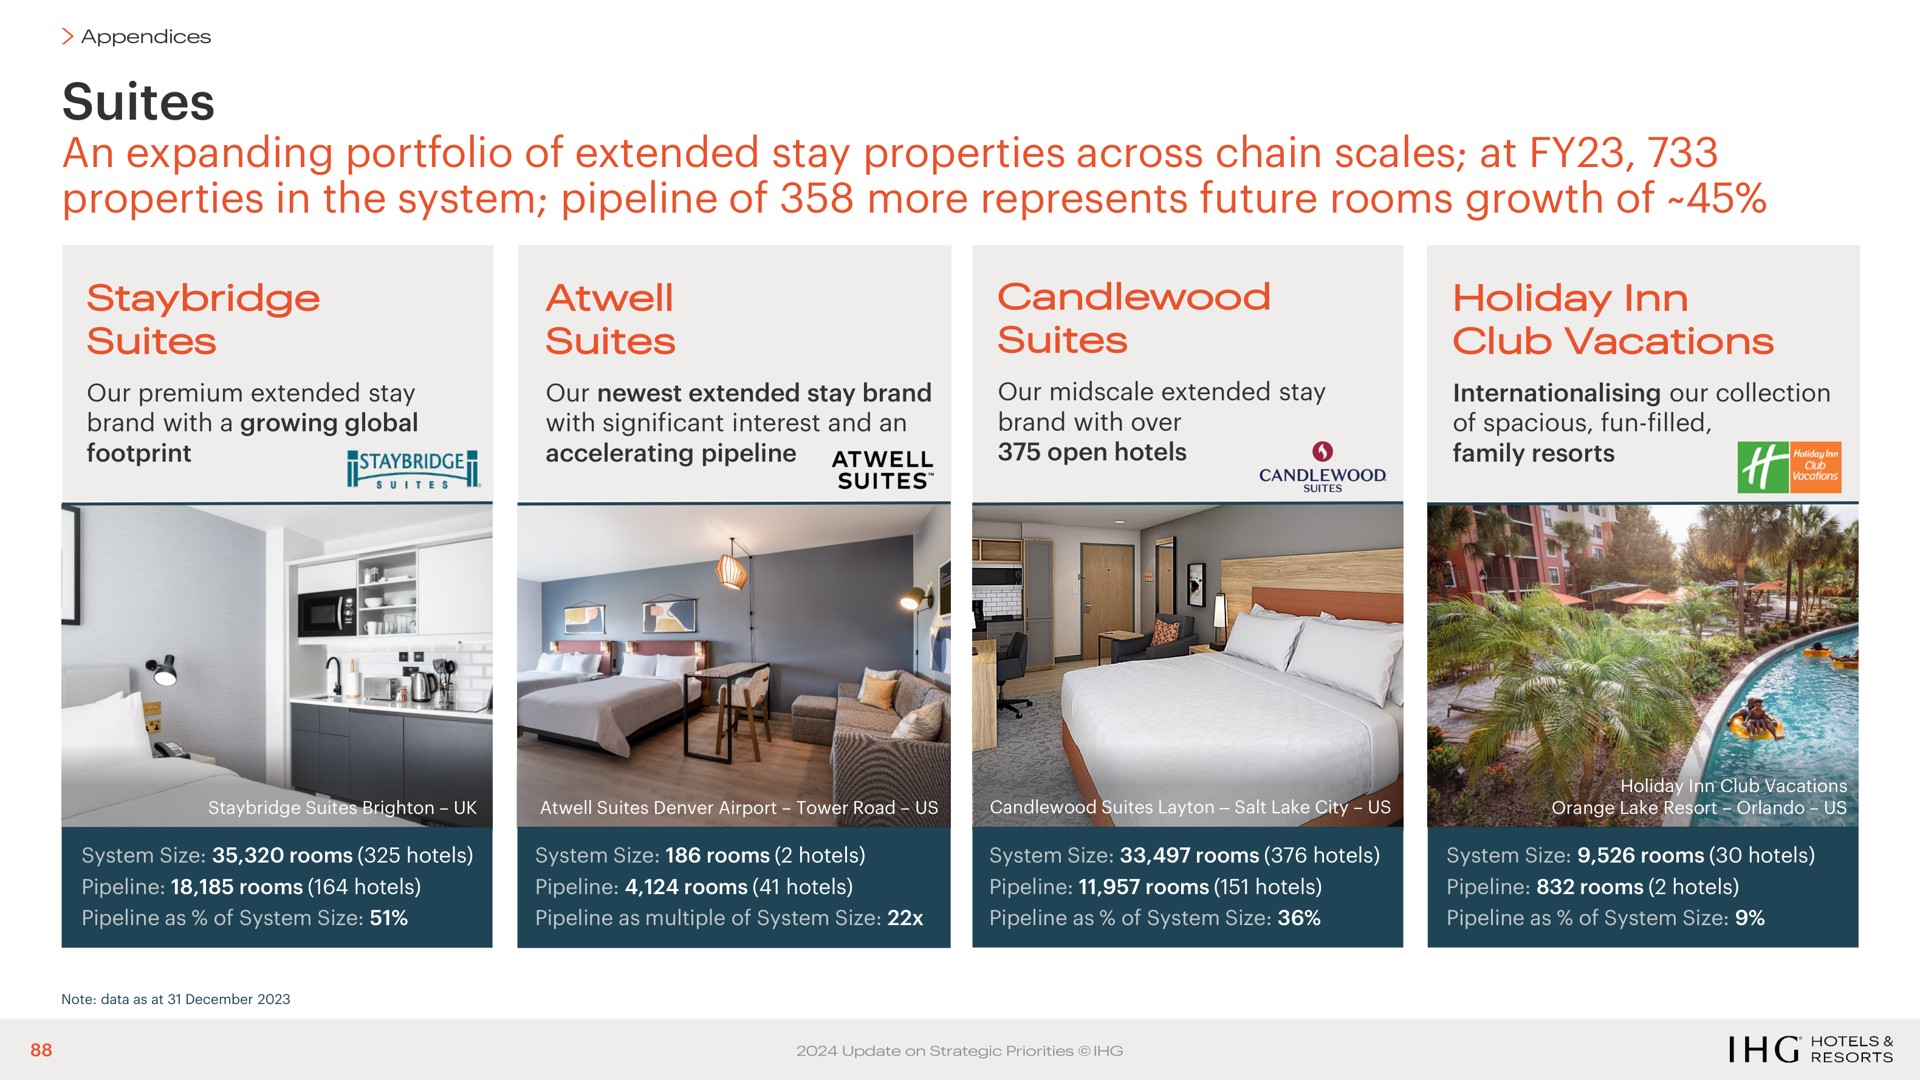 suites an expanding portfolio of extended stay properties across chain scales at properties in the system pipeline of more represents future rooms growth of | IHG Hotels